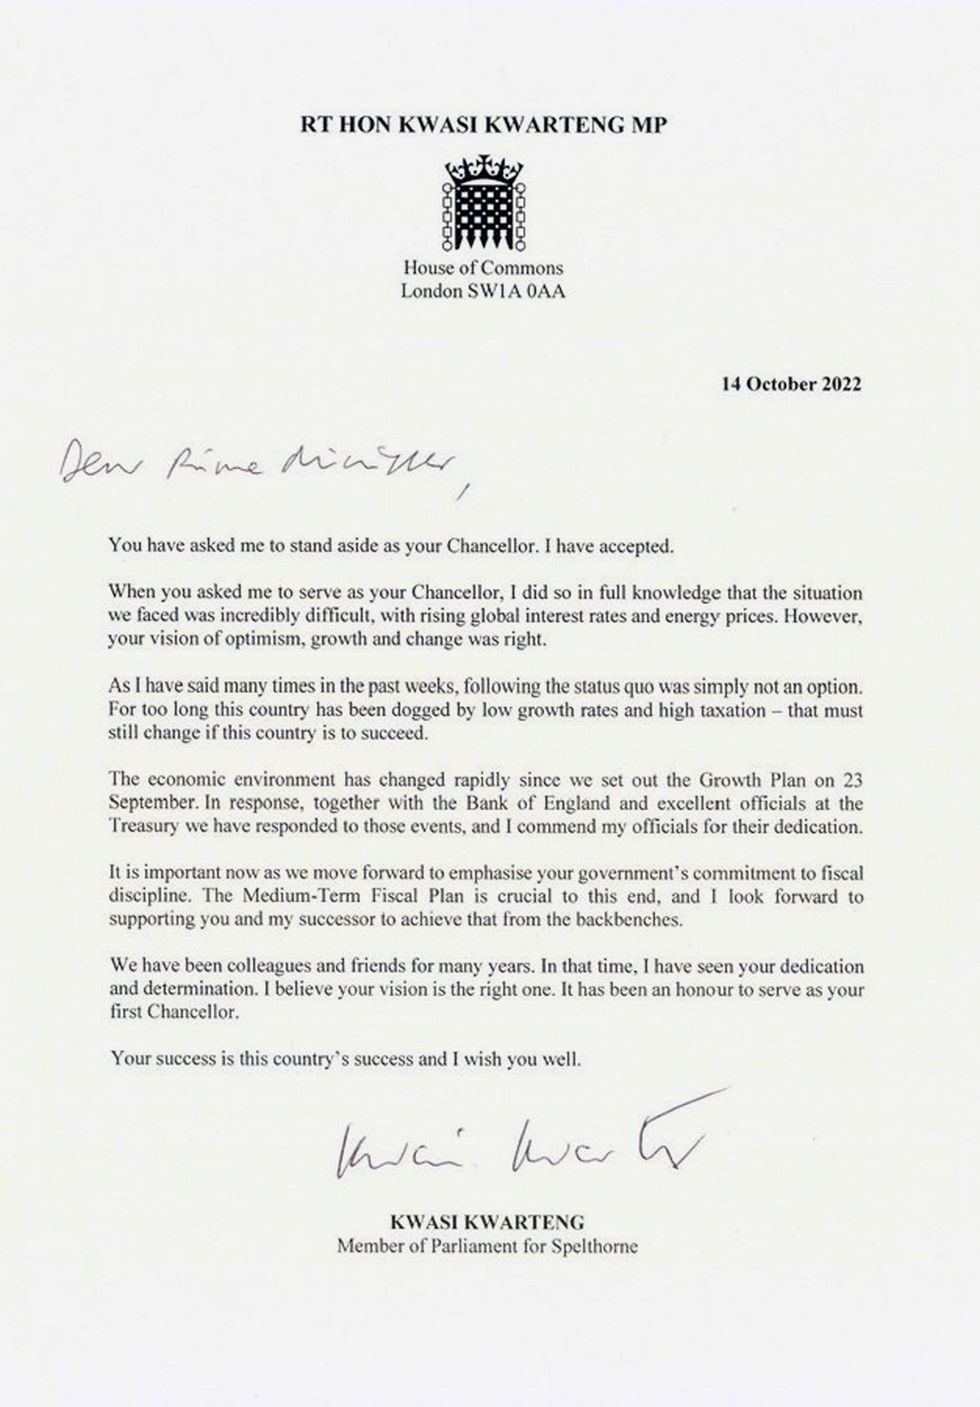 Image taken from the Twitter feed of the Chancellor of the Exchequer Kwasi Kwarteng of his resignation letter. Kwasi Kwarteng said he has accepted Prime Minister Liz Truss' request he %22stand aside%22 as Chancellor. Issue date: Friday October 14, 2022.